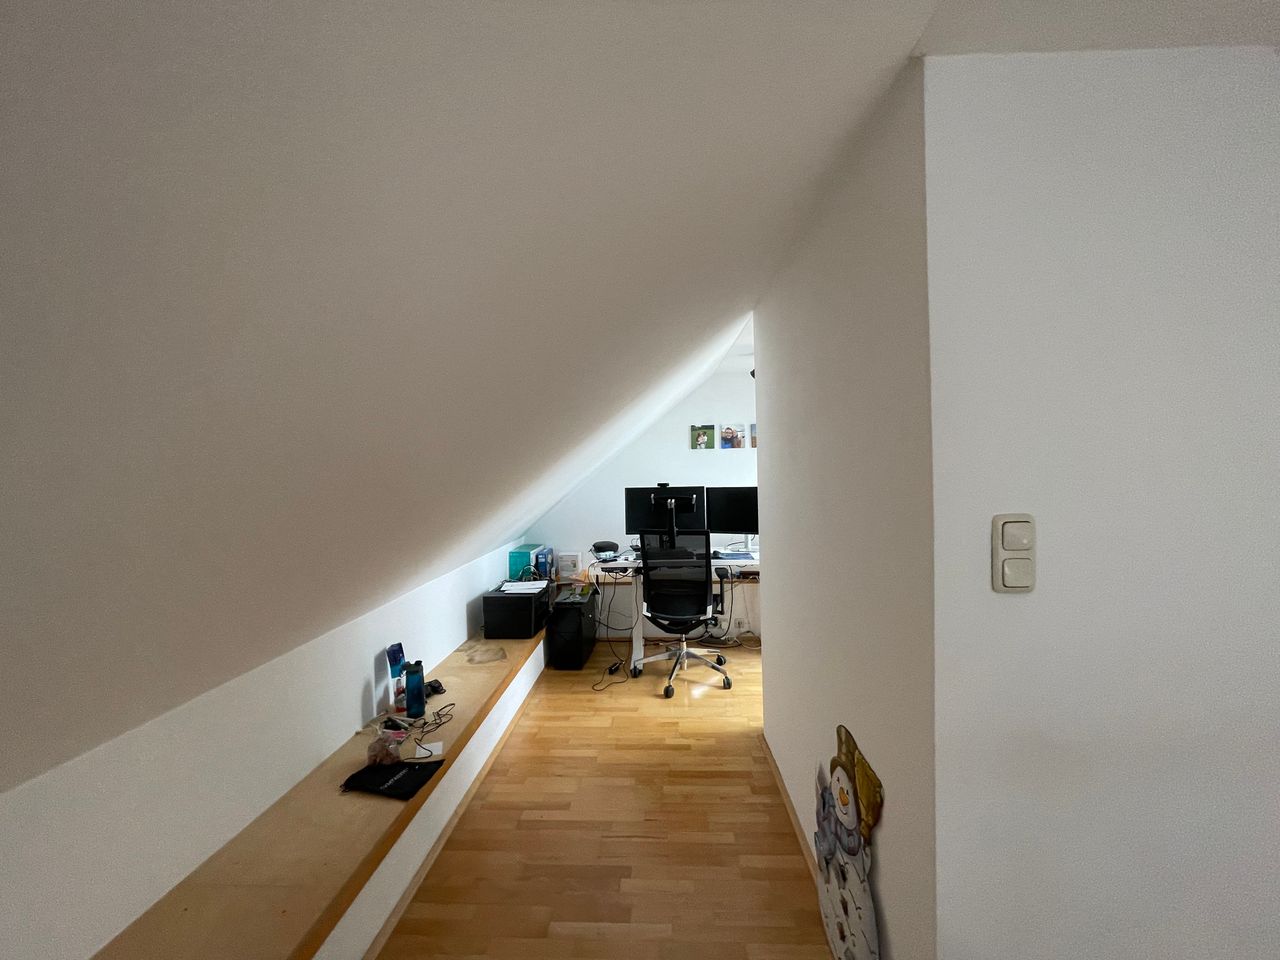 Exclusive Duplex Apartment with Modern Amenities in the Heart of Munich for Temporary Stay